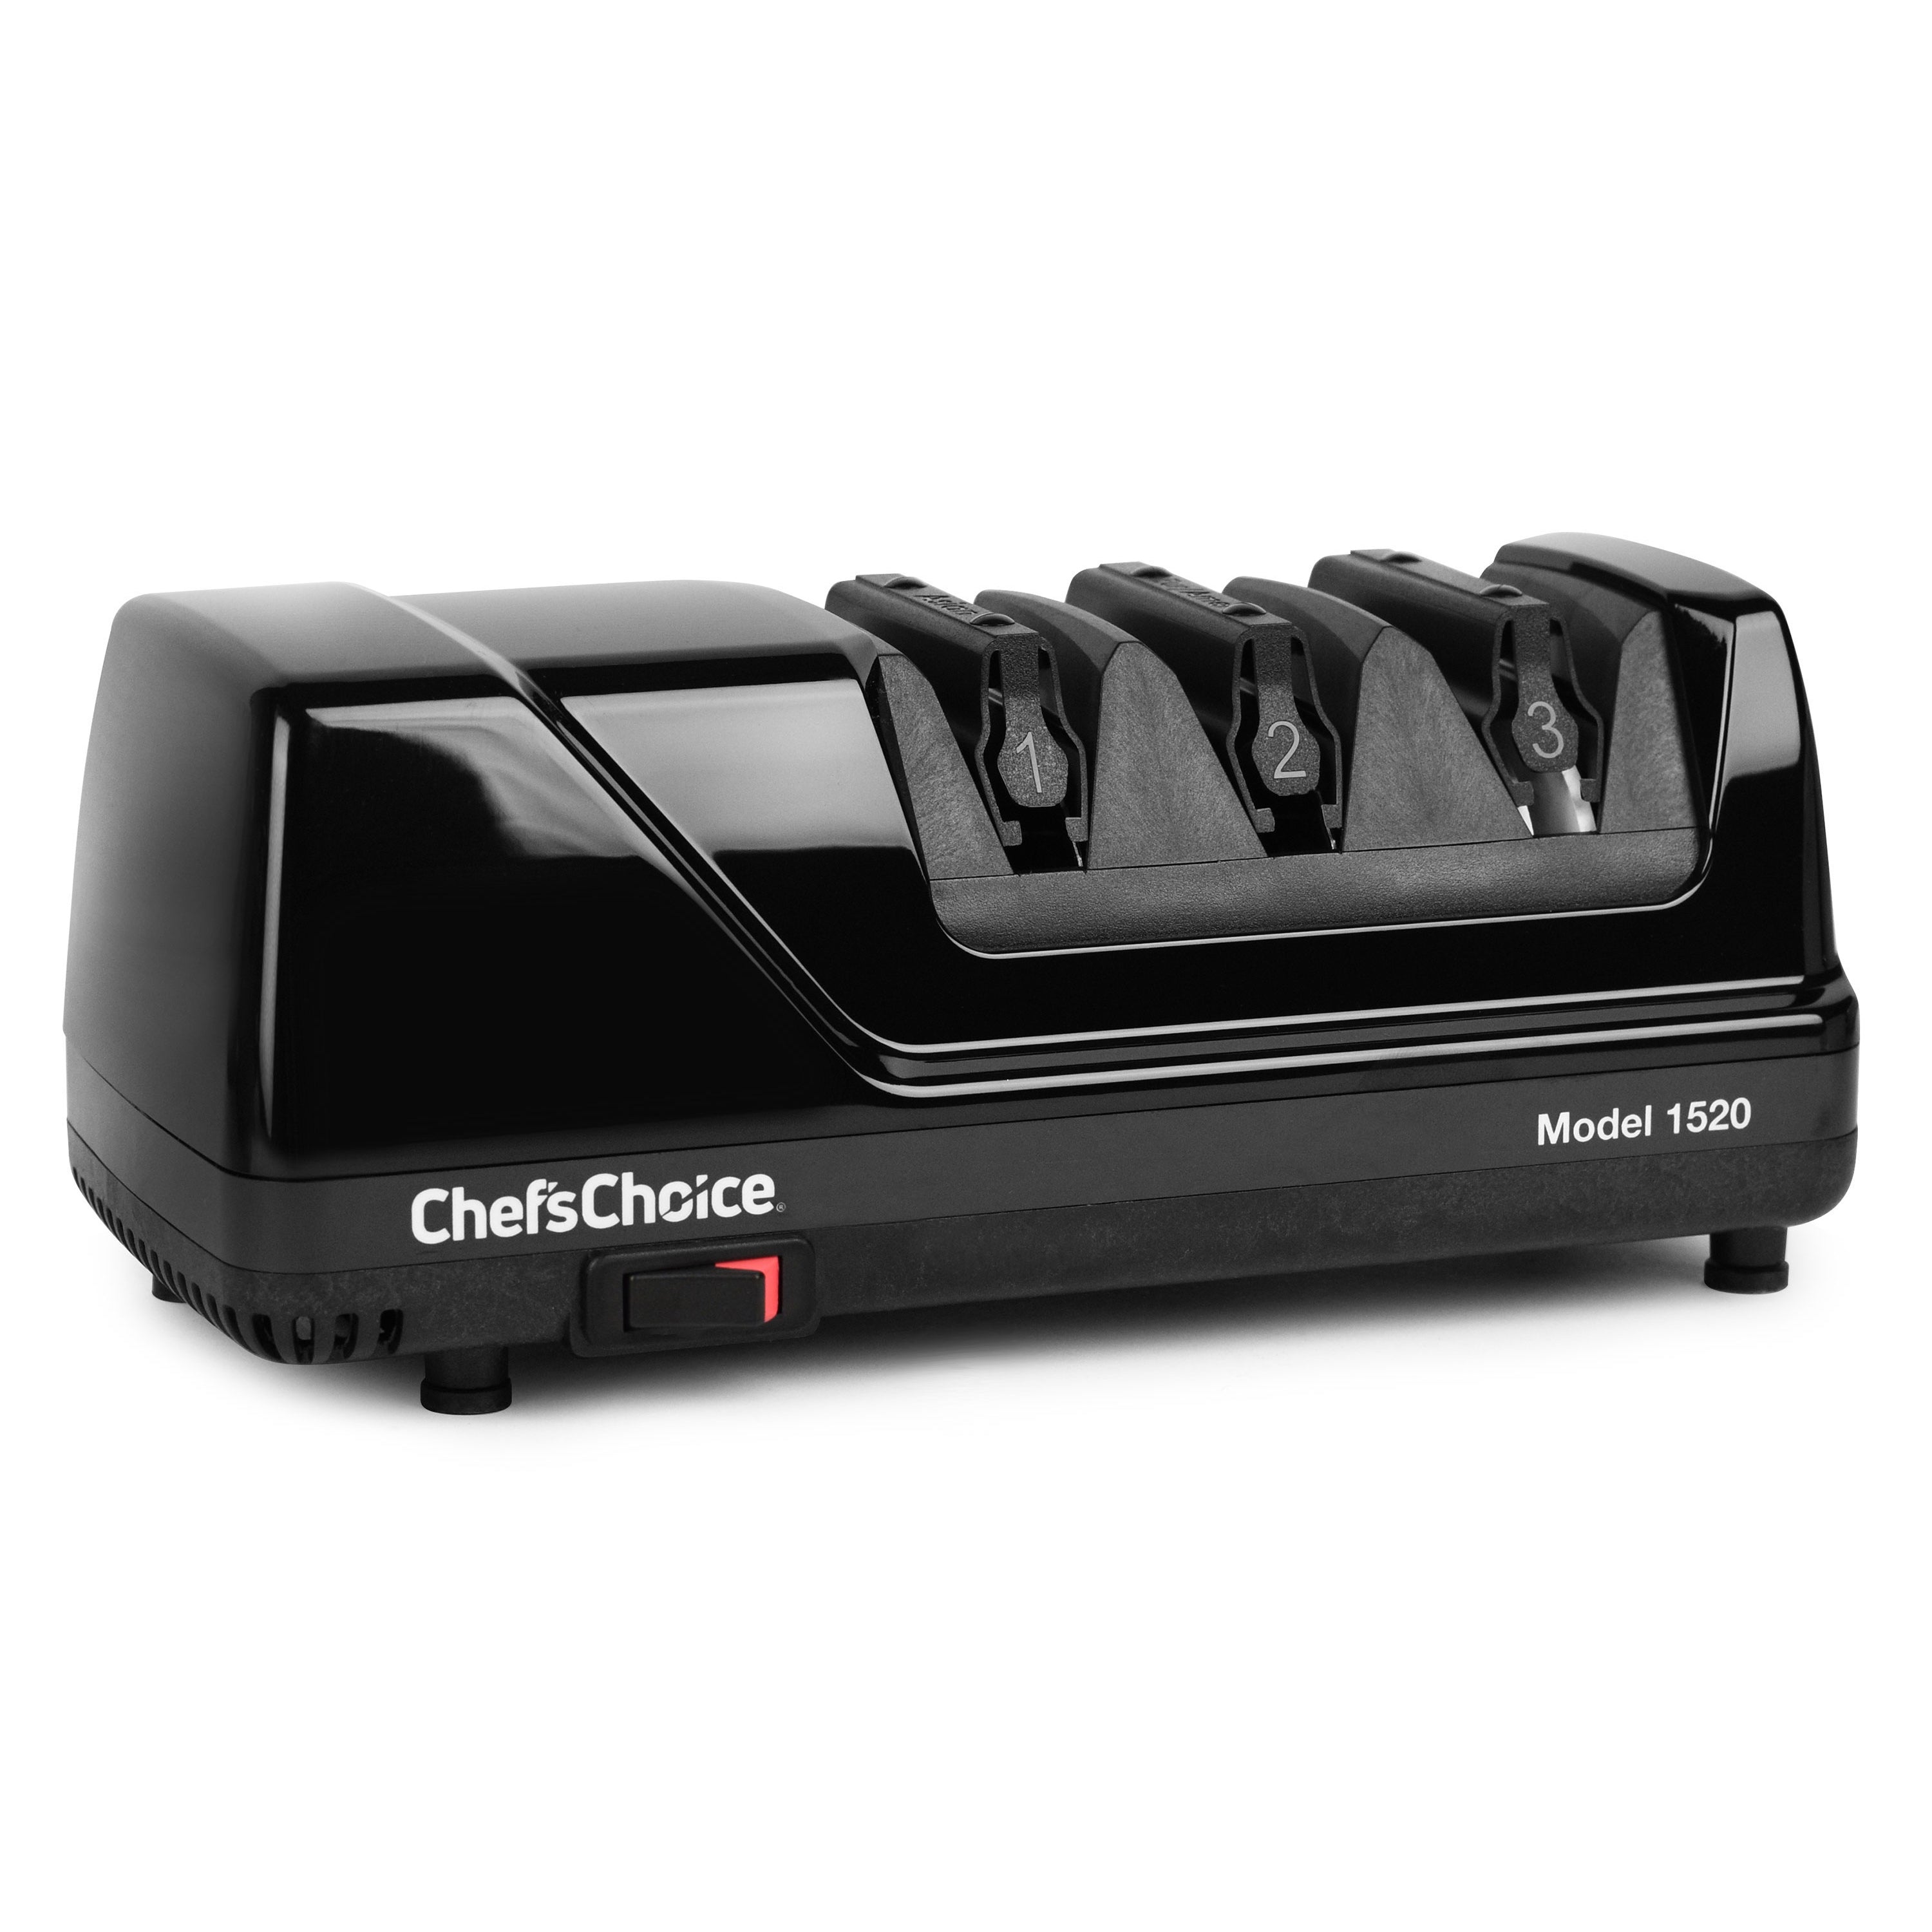 Chef'sChoice DC Electric Knife Sharpener